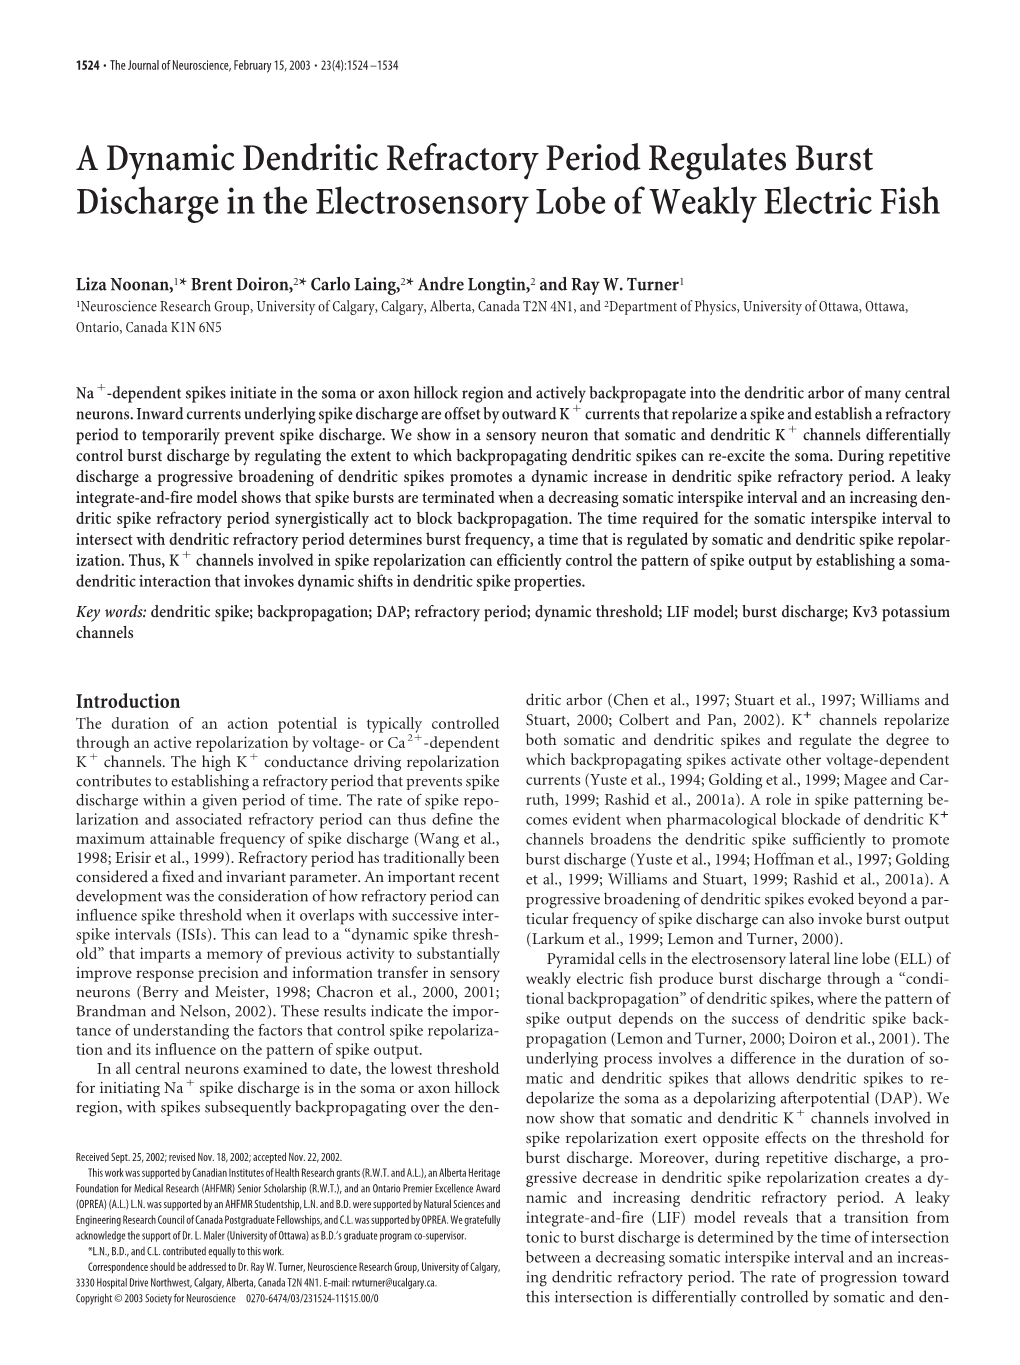 A Dynamic Dendritic Refractory Period Regulates Burst Discharge in the Electrosensory Lobe of Weakly Electric Fish